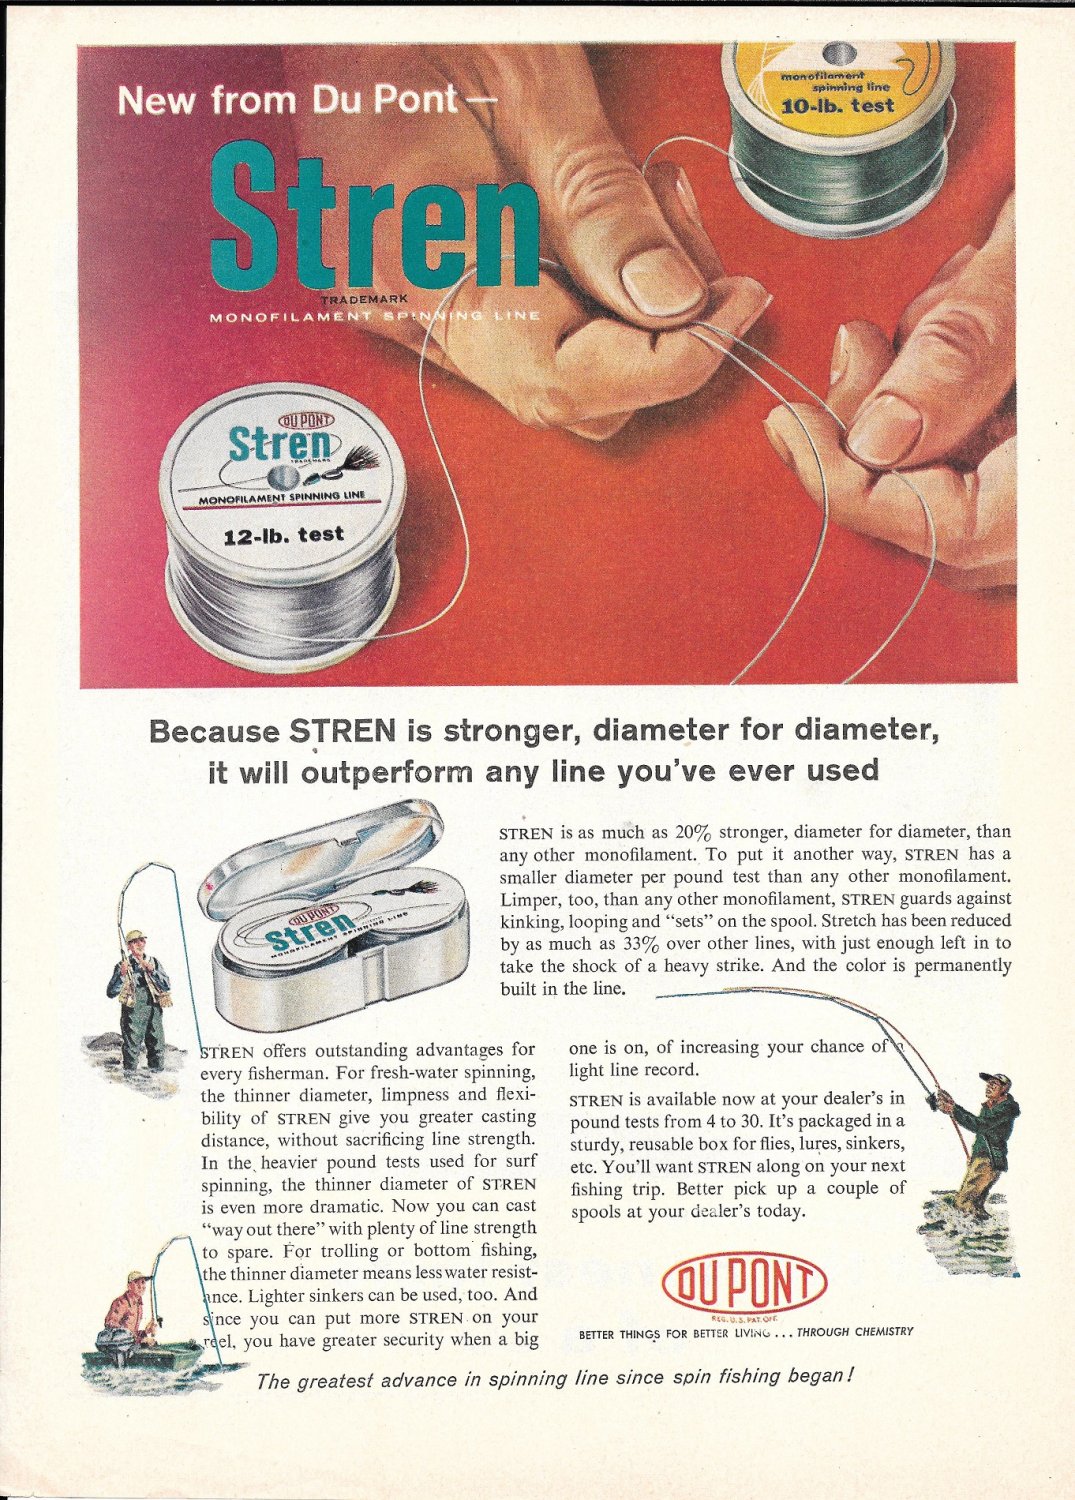 Old Dupont Stren Monofilament Fishing Line Ad